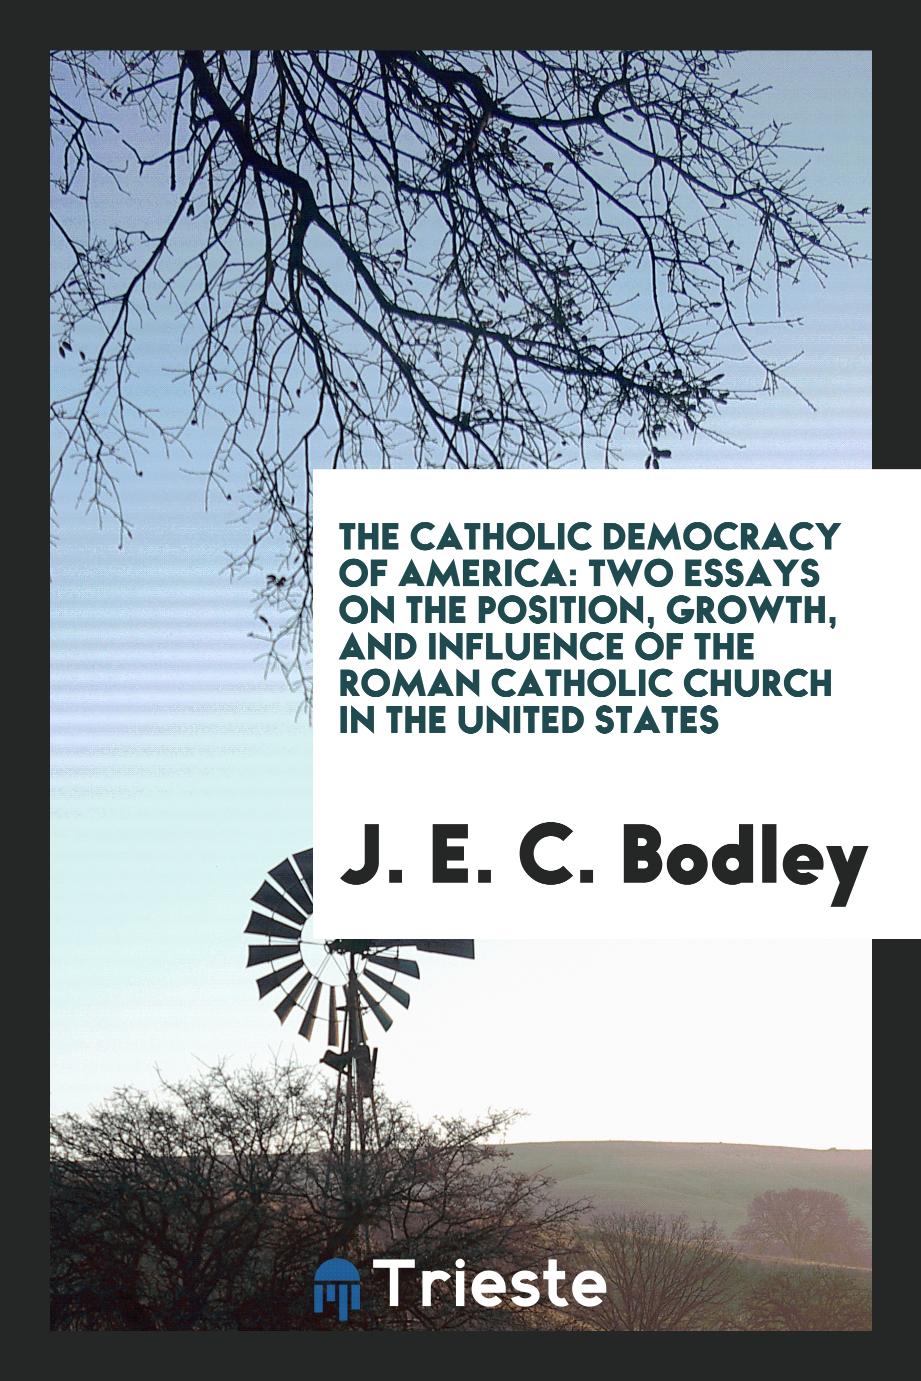 The Catholic Democracy of America: Two Essays on the Position, Growth, and Influence of the Roman Catholic Church in the United States